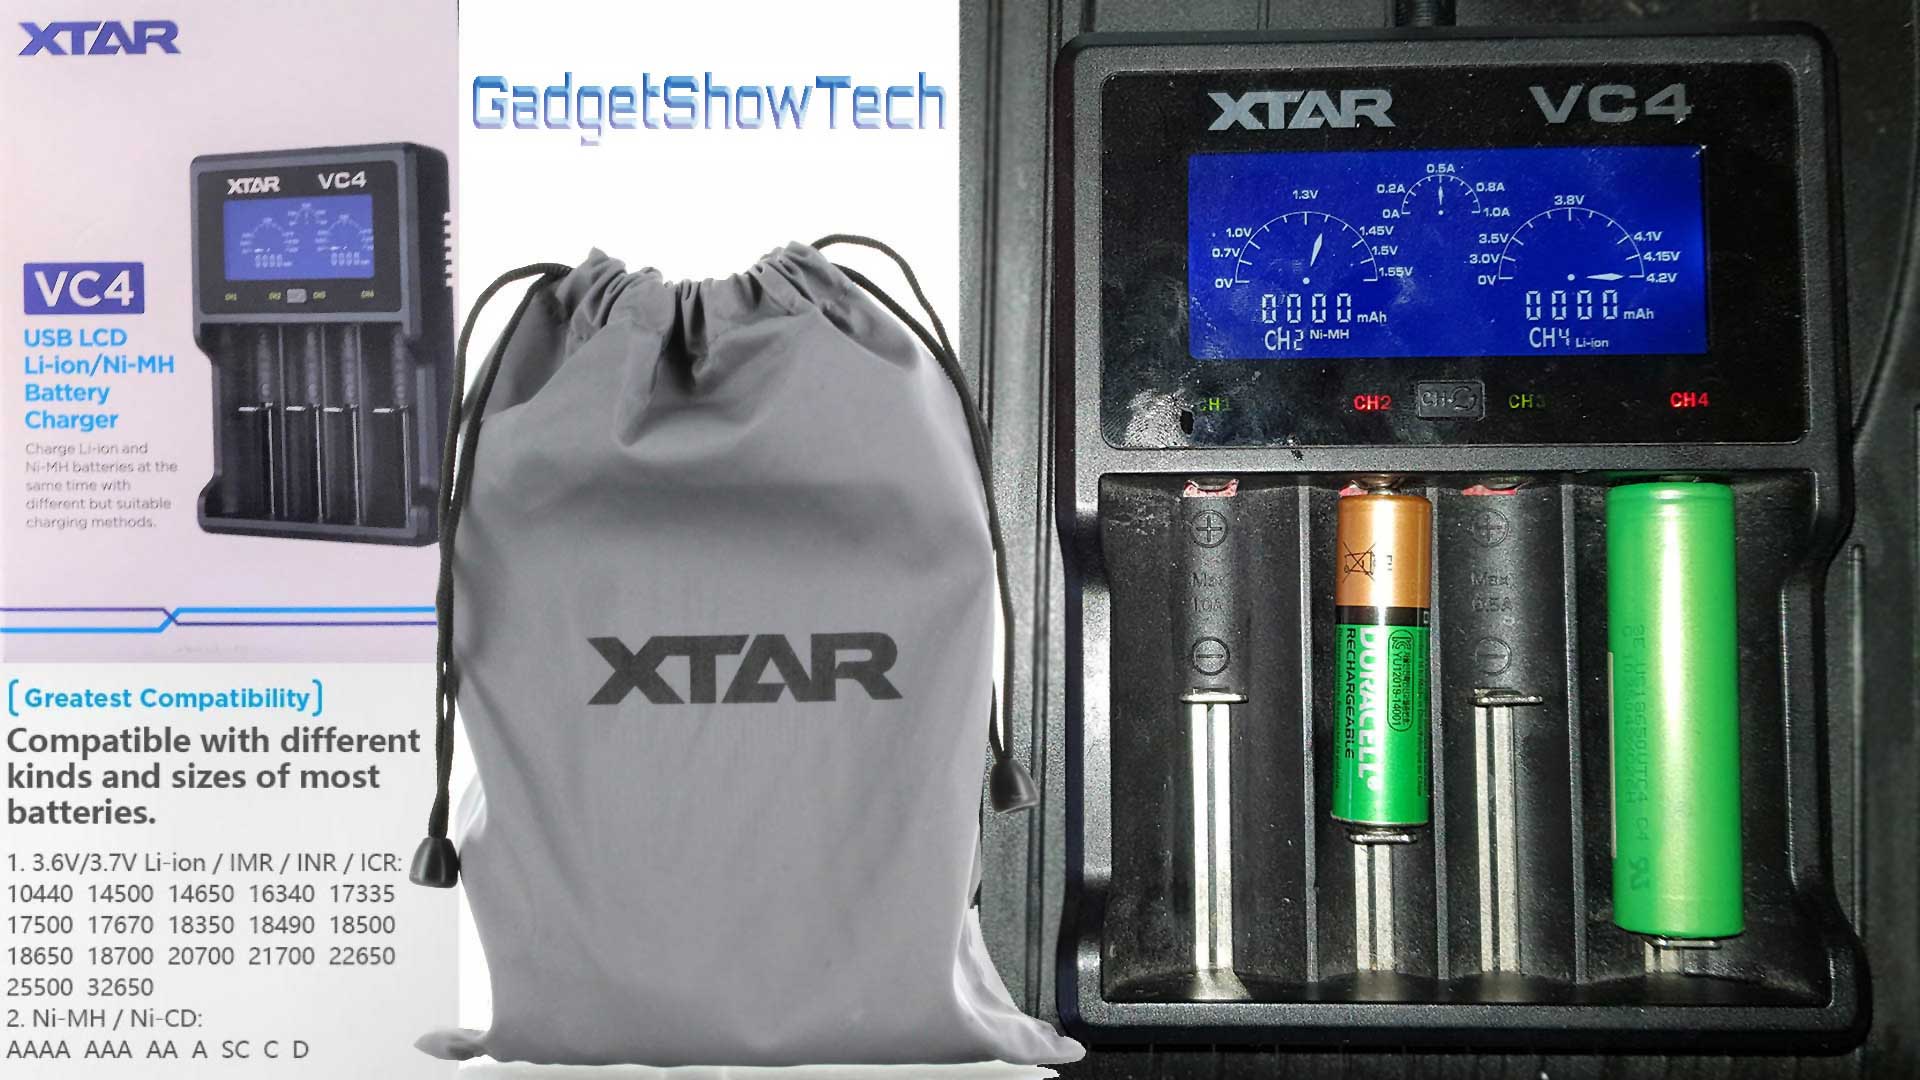 Xtar VC4 v Nitecore D4 - Charger Review and Test video